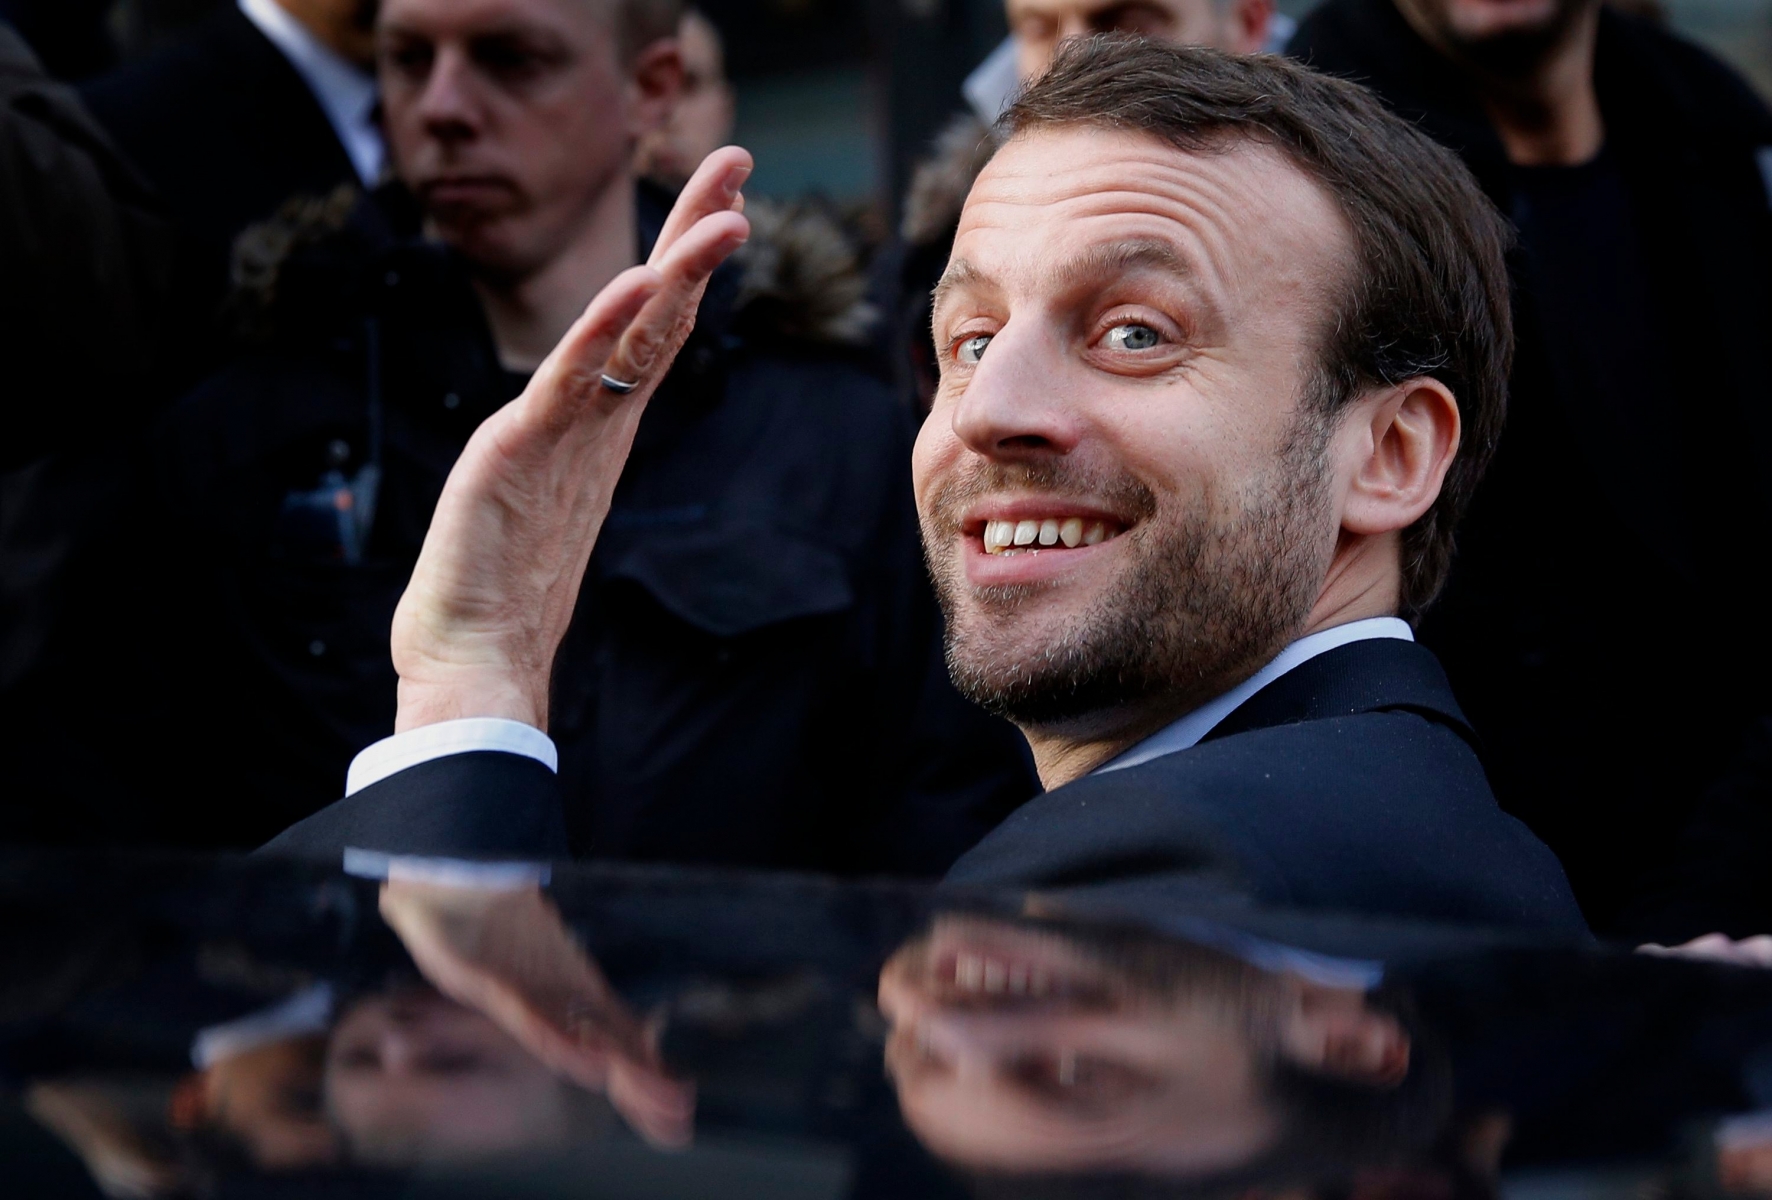 FILE - In this Jan.6, 2016 file photo, French Economy Minister Emmanuel Macron waves as he leaves after a visit to a shopping center. Macron, an outspoken former investment banker who has encouraged start-ups and more labor flexibility, has quit the socialist government Tuesday Aug. 30, 2016 amid speculation that he is considering a presidential bid. (AP Photo/Christophe Ena; File) France Presidential Elections